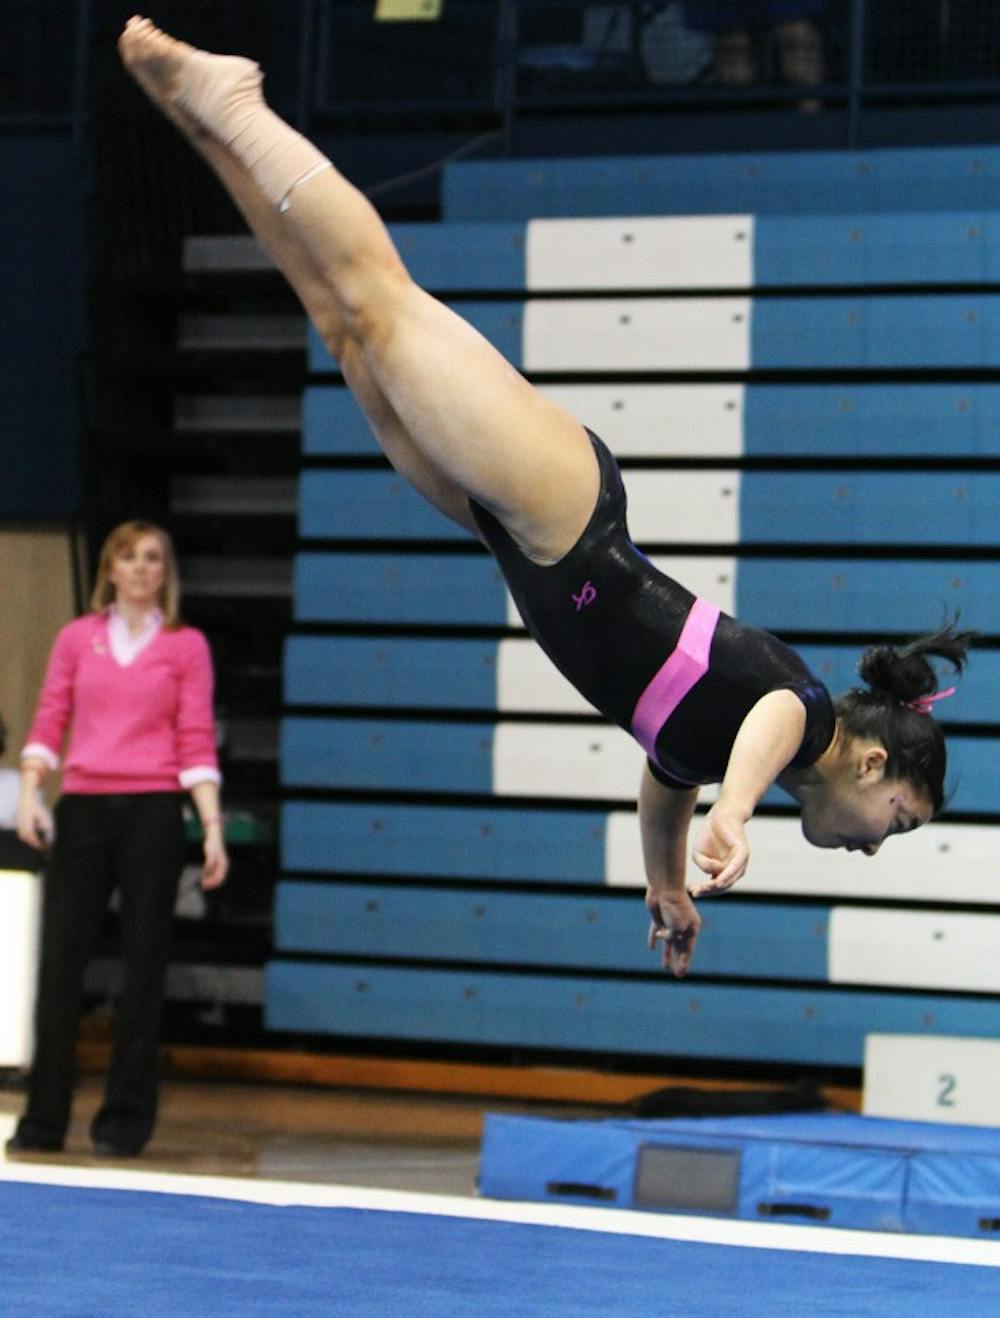 Christine Nguyen performed her floor routine in a Feb. 14 match against Maryland. DTH File/Phong Dinh